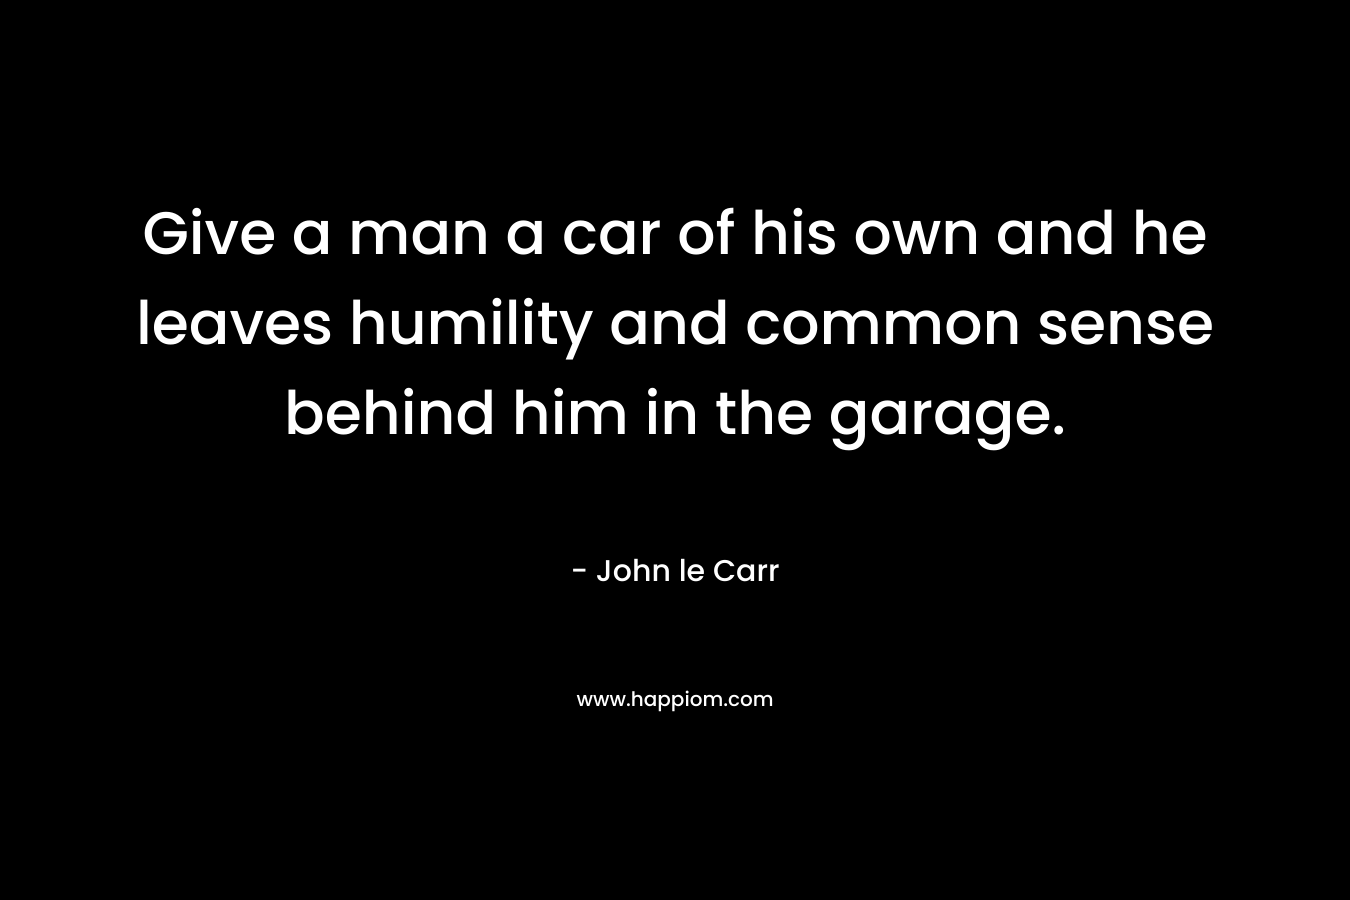 Give a man a car of his own and he leaves humility and common sense behind him in the garage.